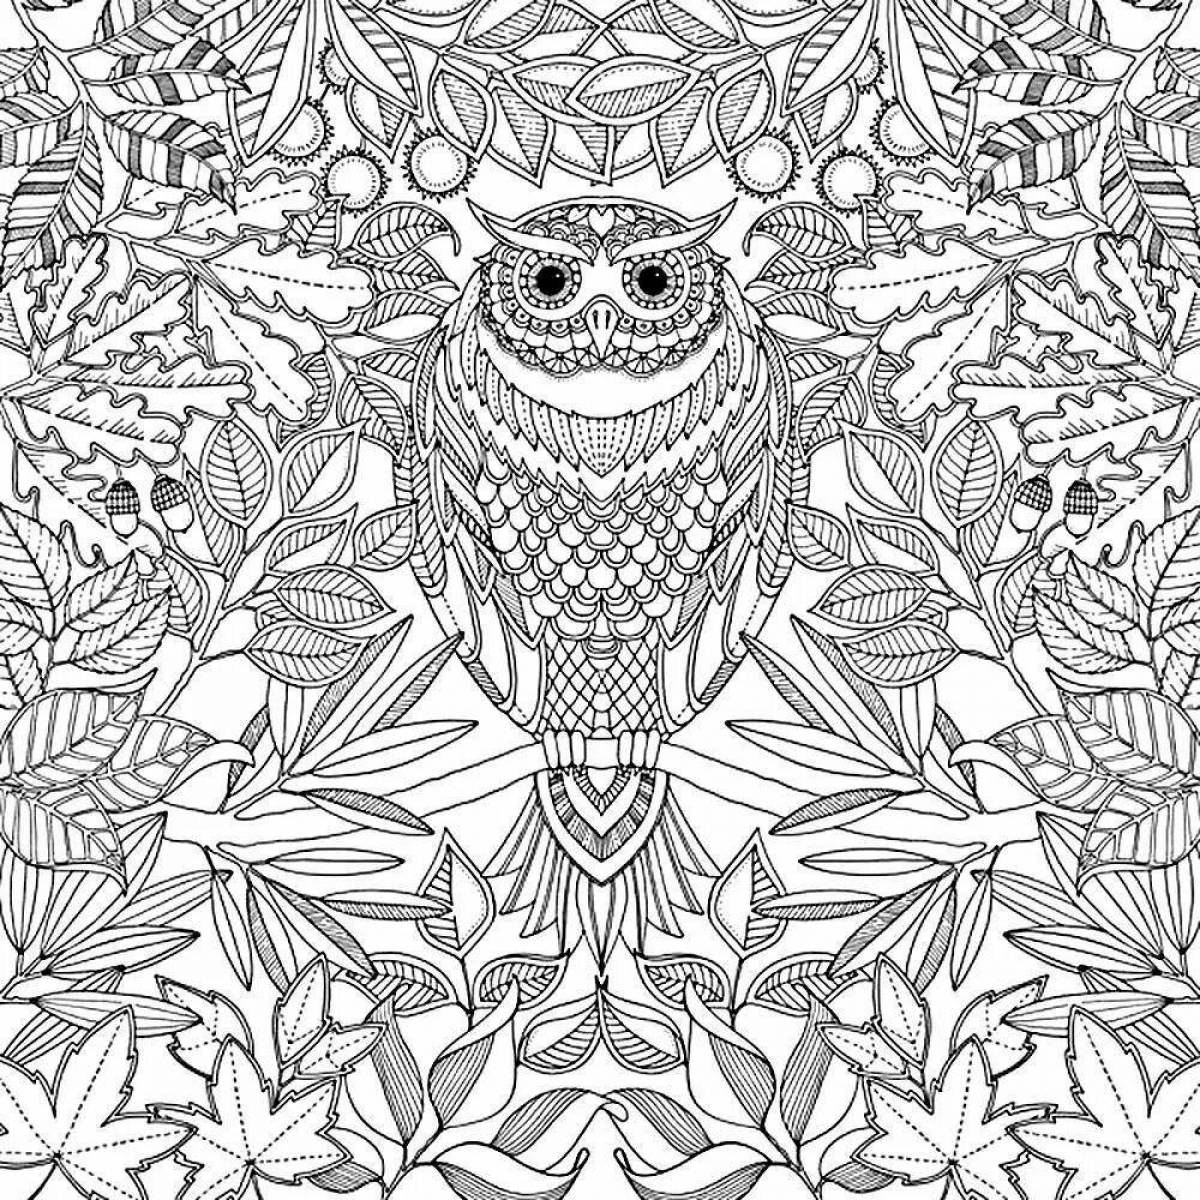 Delicate adult coloring book